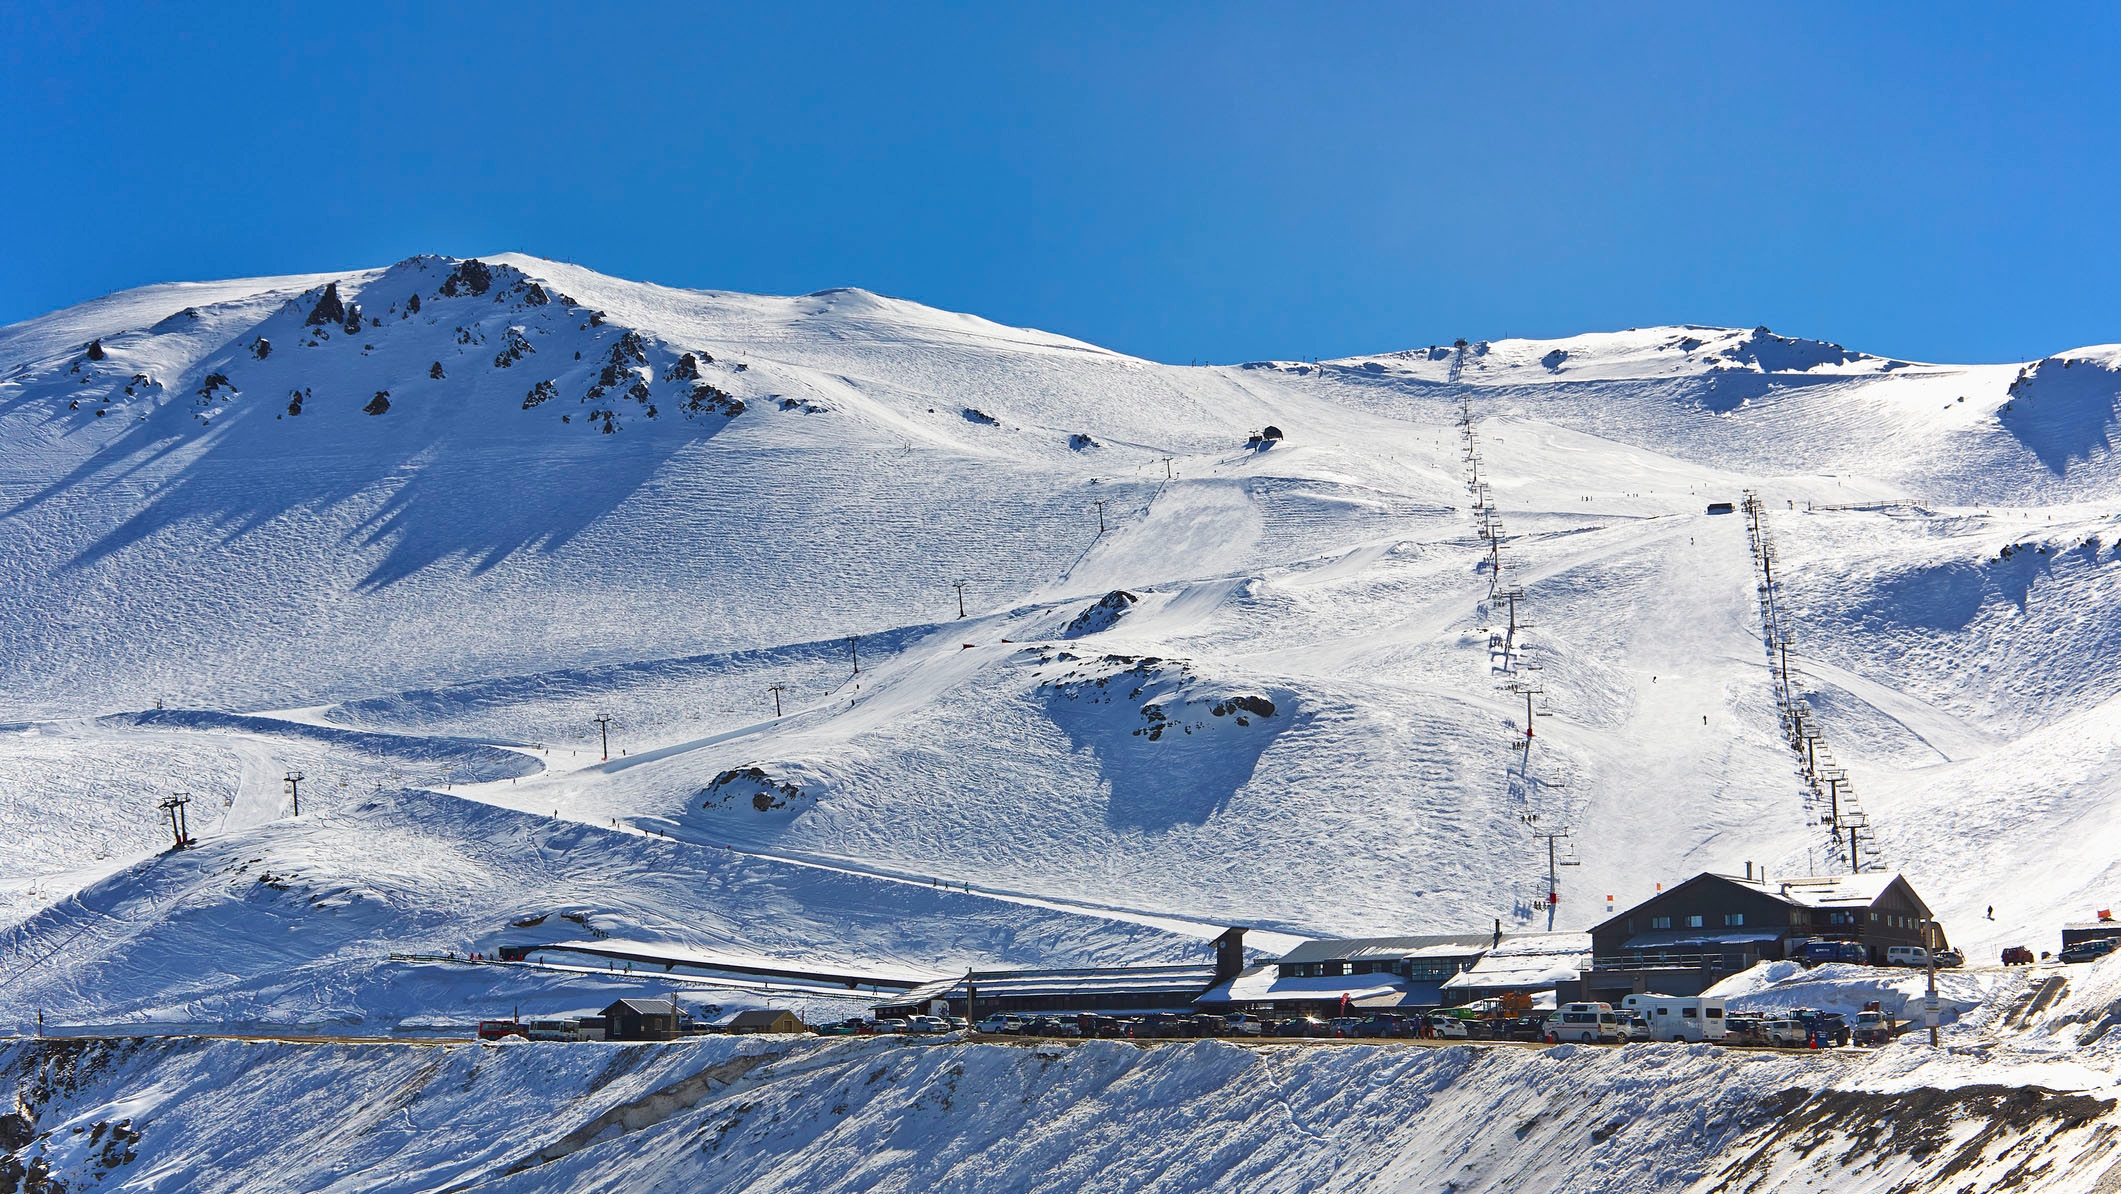 Ski fields like Mount Hutt are a great recreational activity for the people of Christchurch